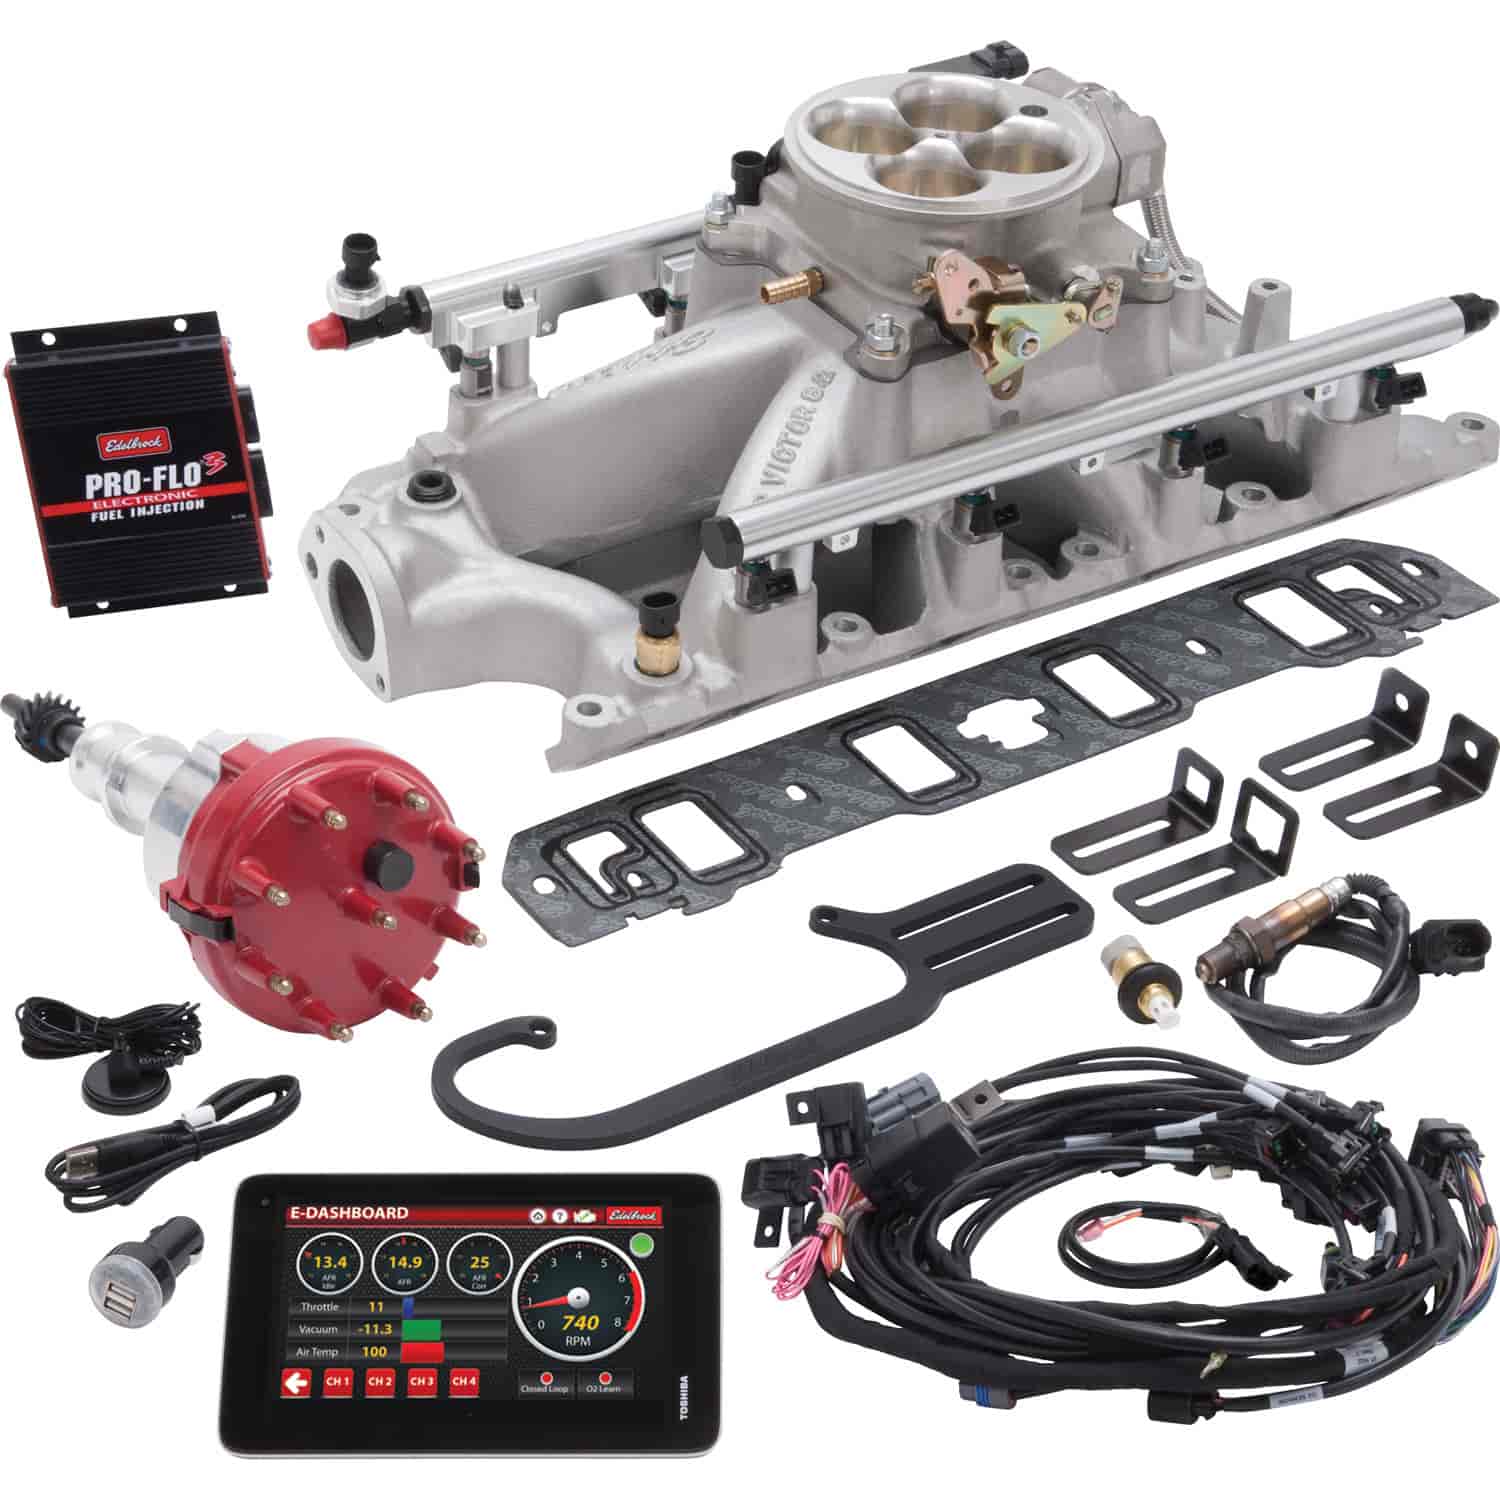 Pro-Flo 3 EFI System Small Block Ford